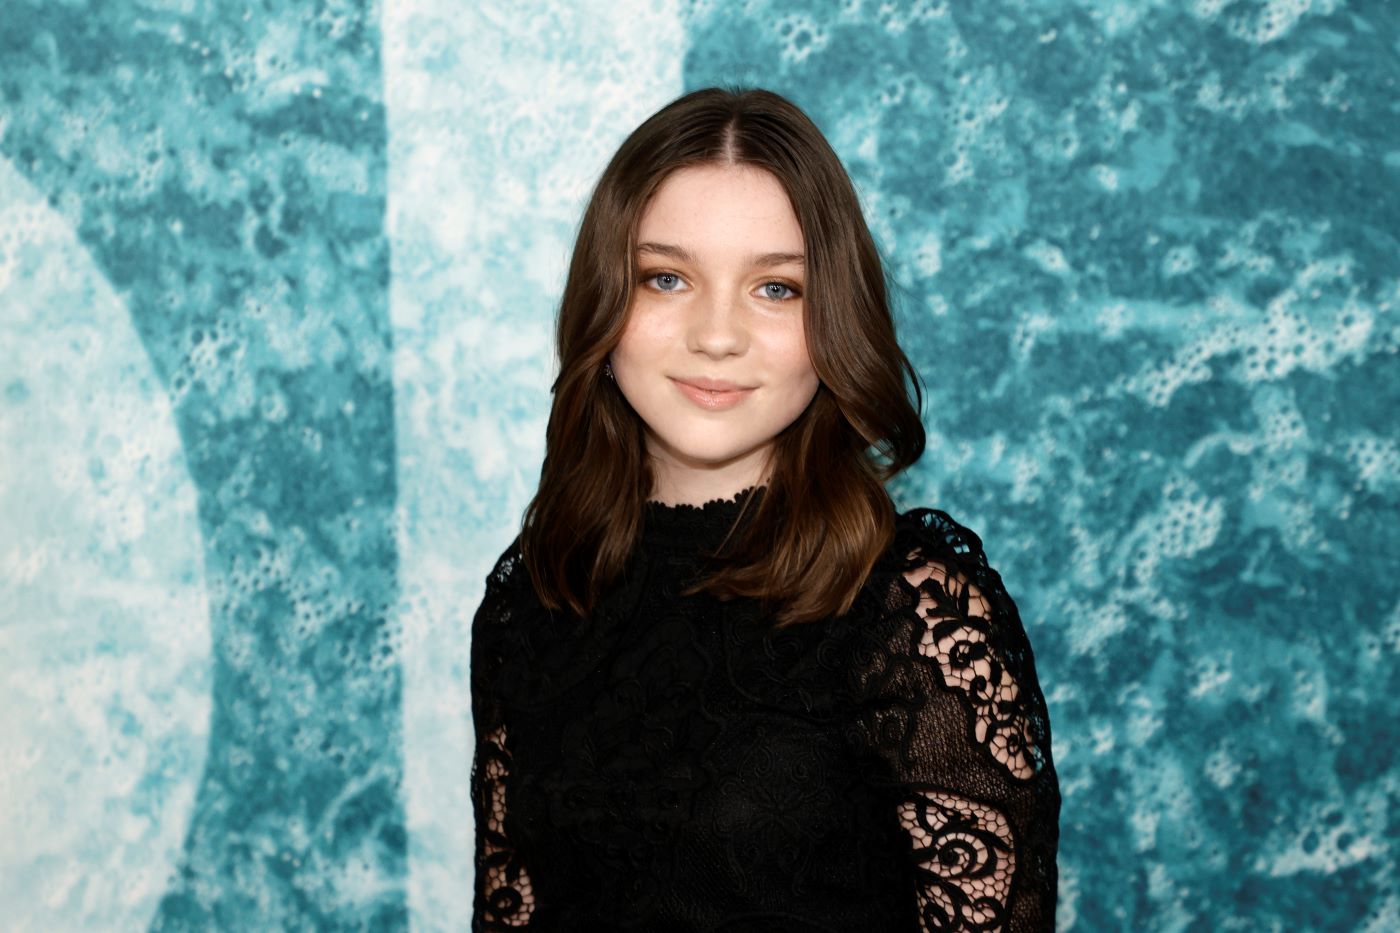 Alexa Swinton is in-front of a ocean colored and textured background wearing a black blouse with with black full-length lace sleeves.